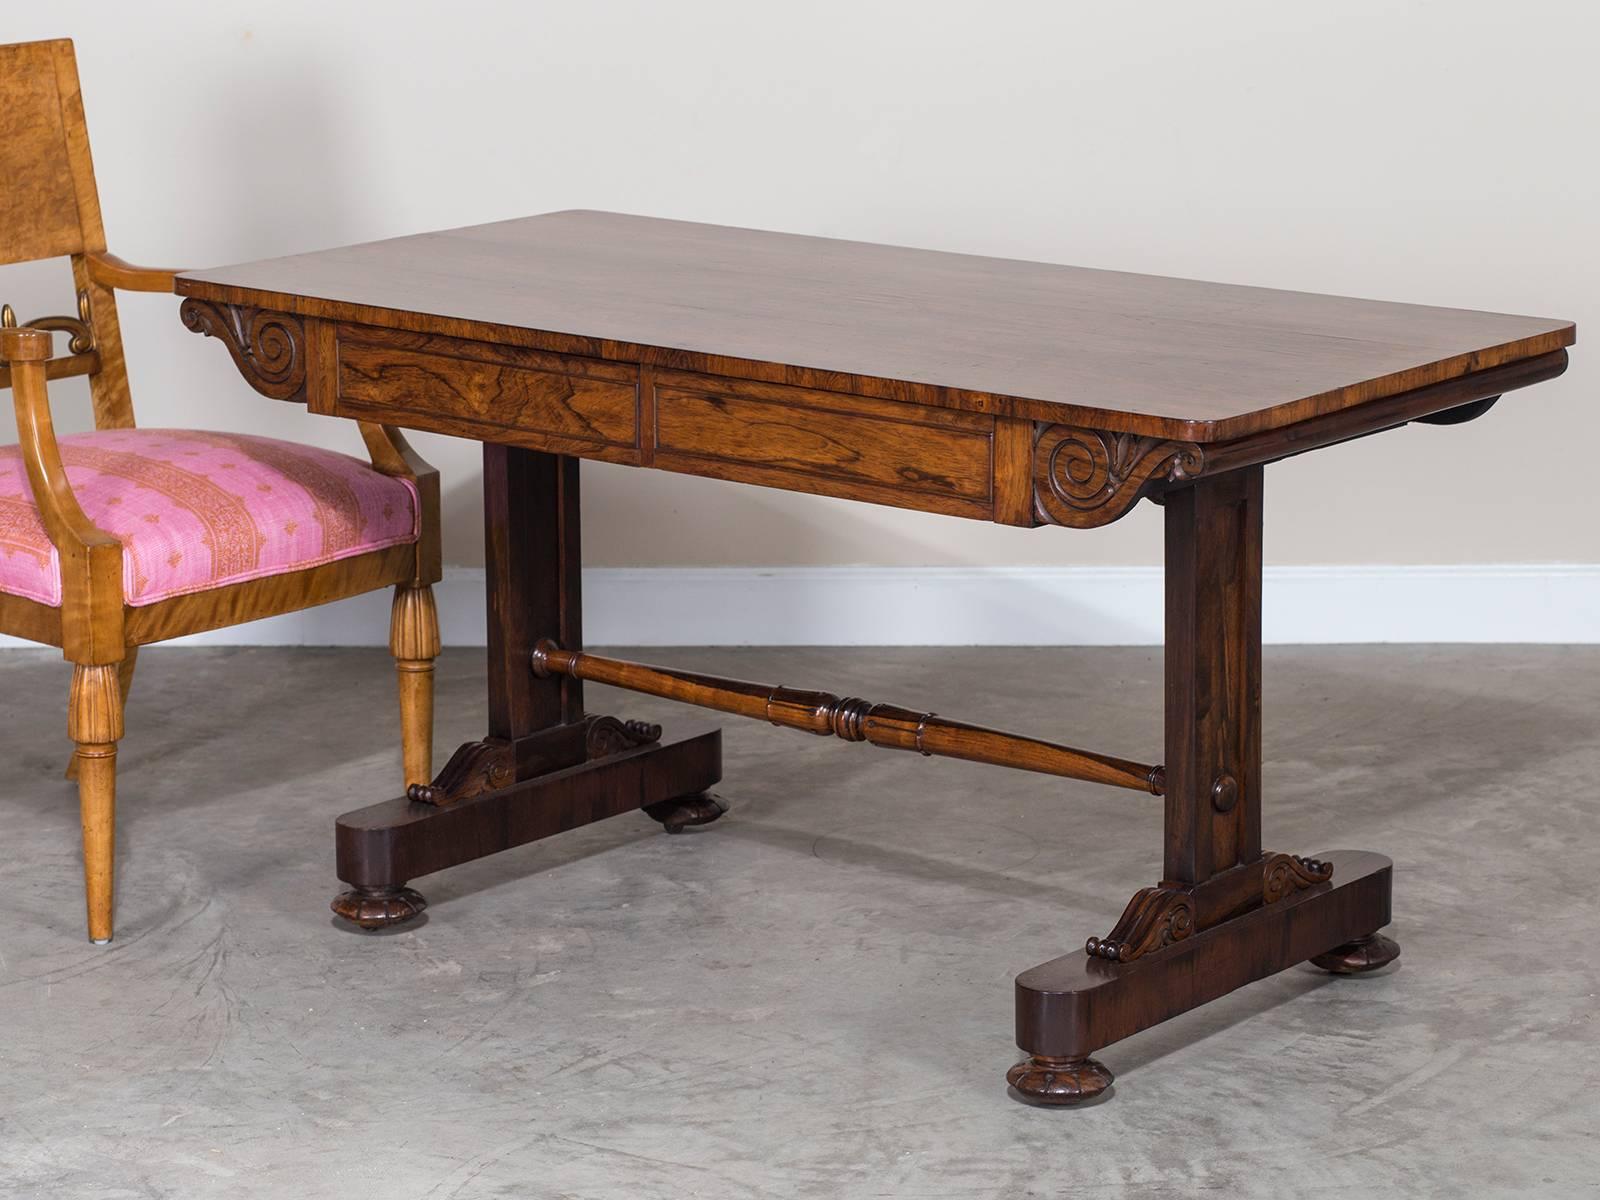 Receive our new selections direct from 1stdibs by email each week. Please click Follow Dealer below and see them first!

The restrained and elegant profile of this antique English rosewood writing or library table circa 1835 gives it a stylishness